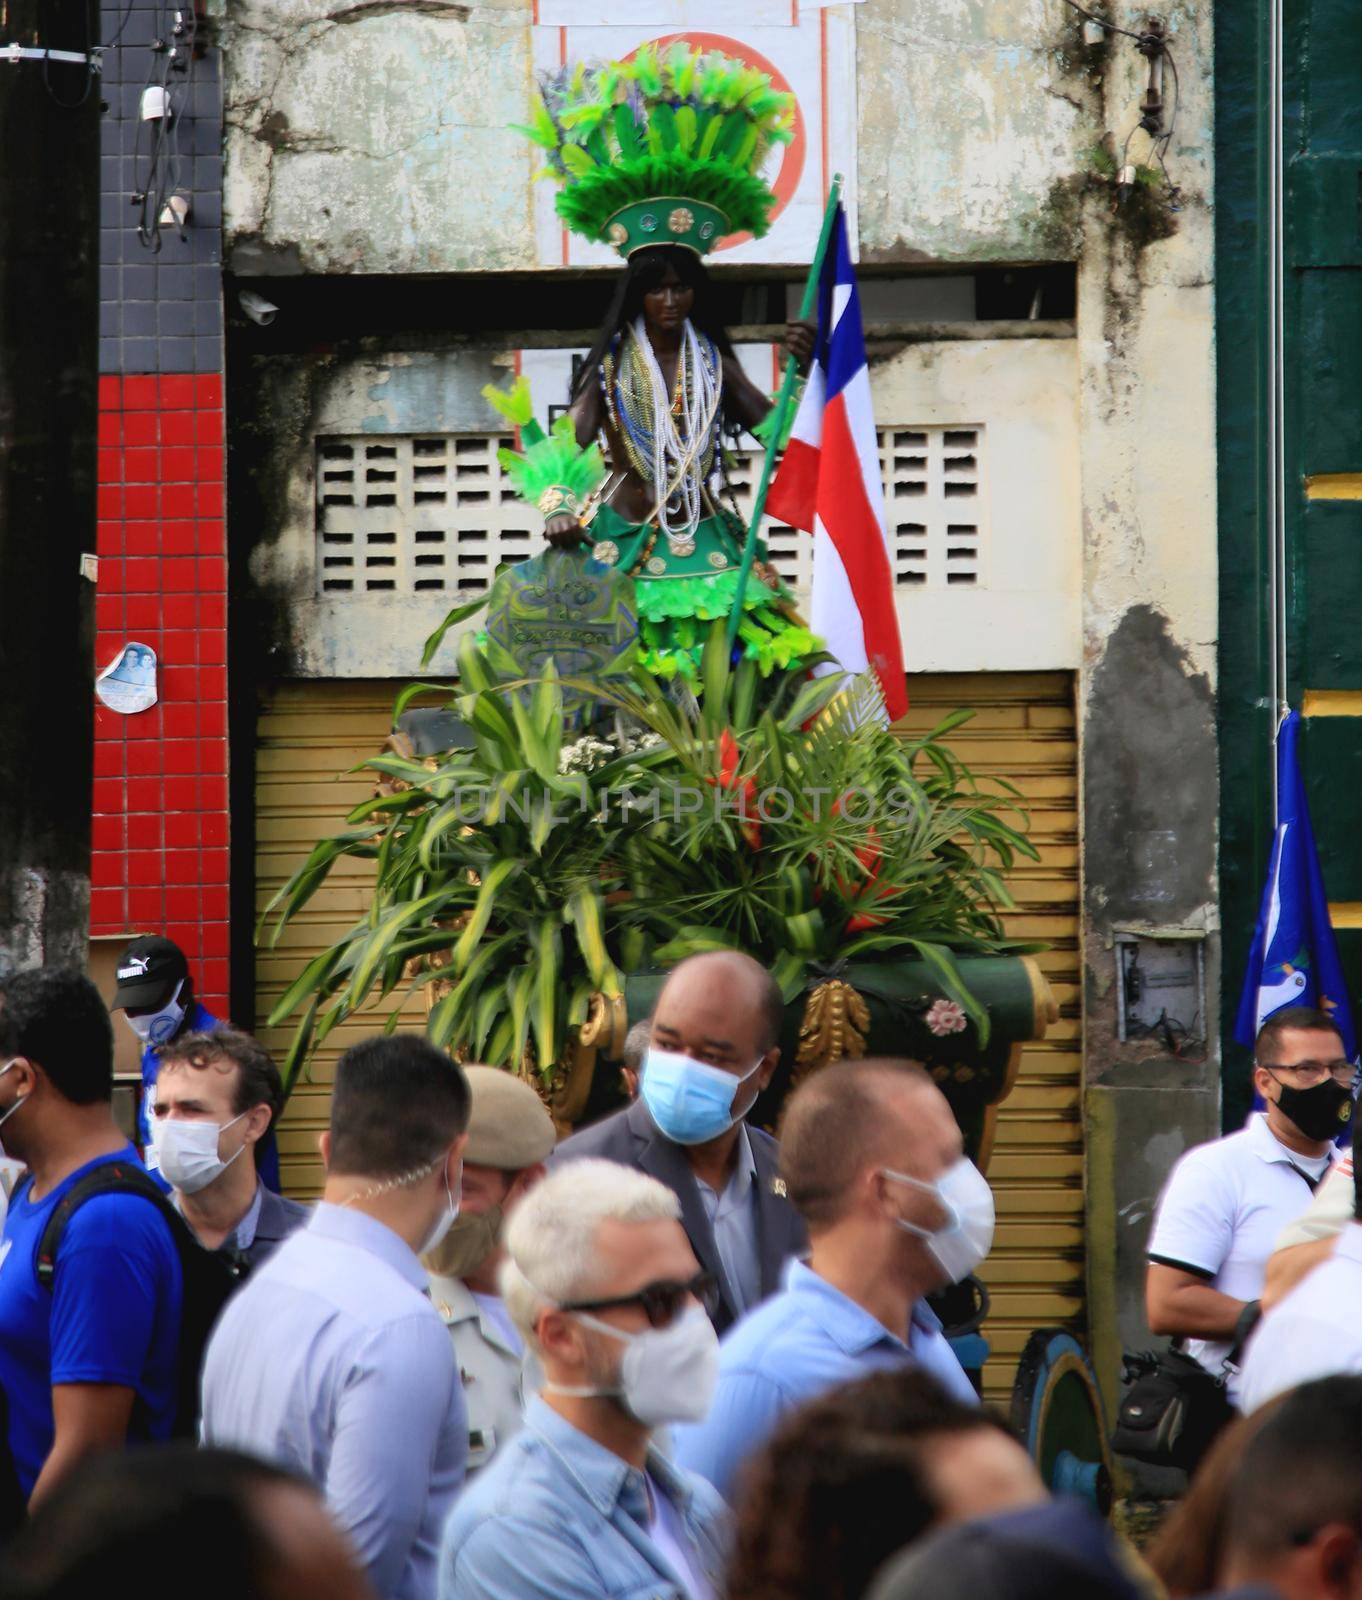 salvador, bahia, brazil - july 2, 2021: population observe the Caboclo and Cabocla, symbols of the struggle for independence of Bahia, seen at Pavilhao 2 de Julho in the city of Salvador.